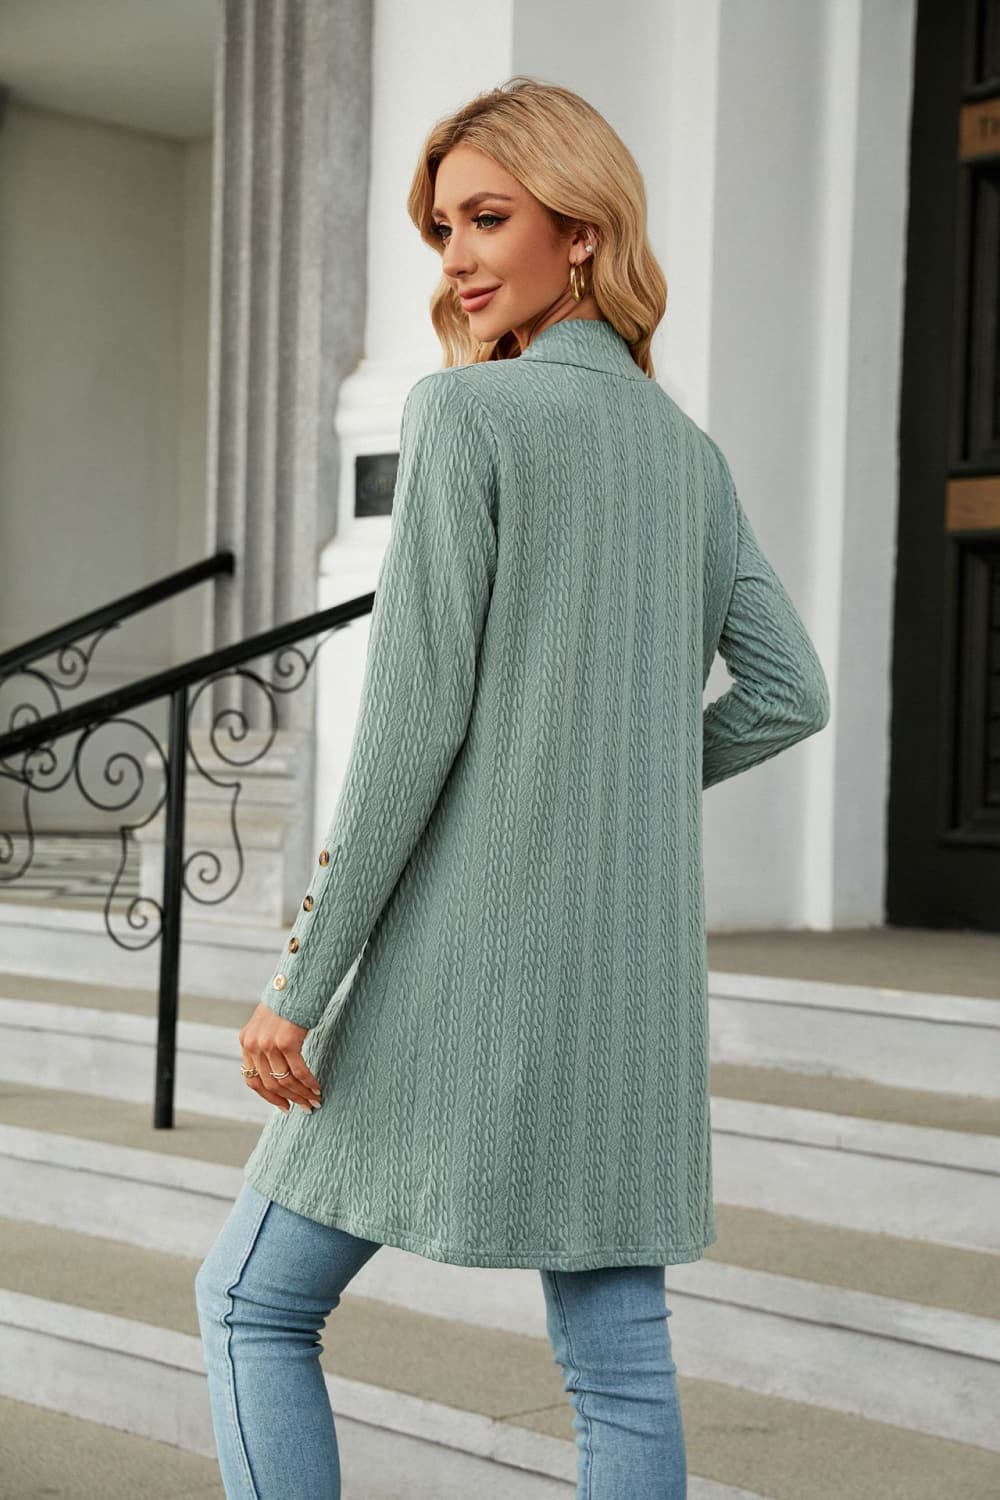 Long Sleeve Open Front Cardigan - Women’s Clothing & Accessories - Shirts & Tops - 6 - 2024